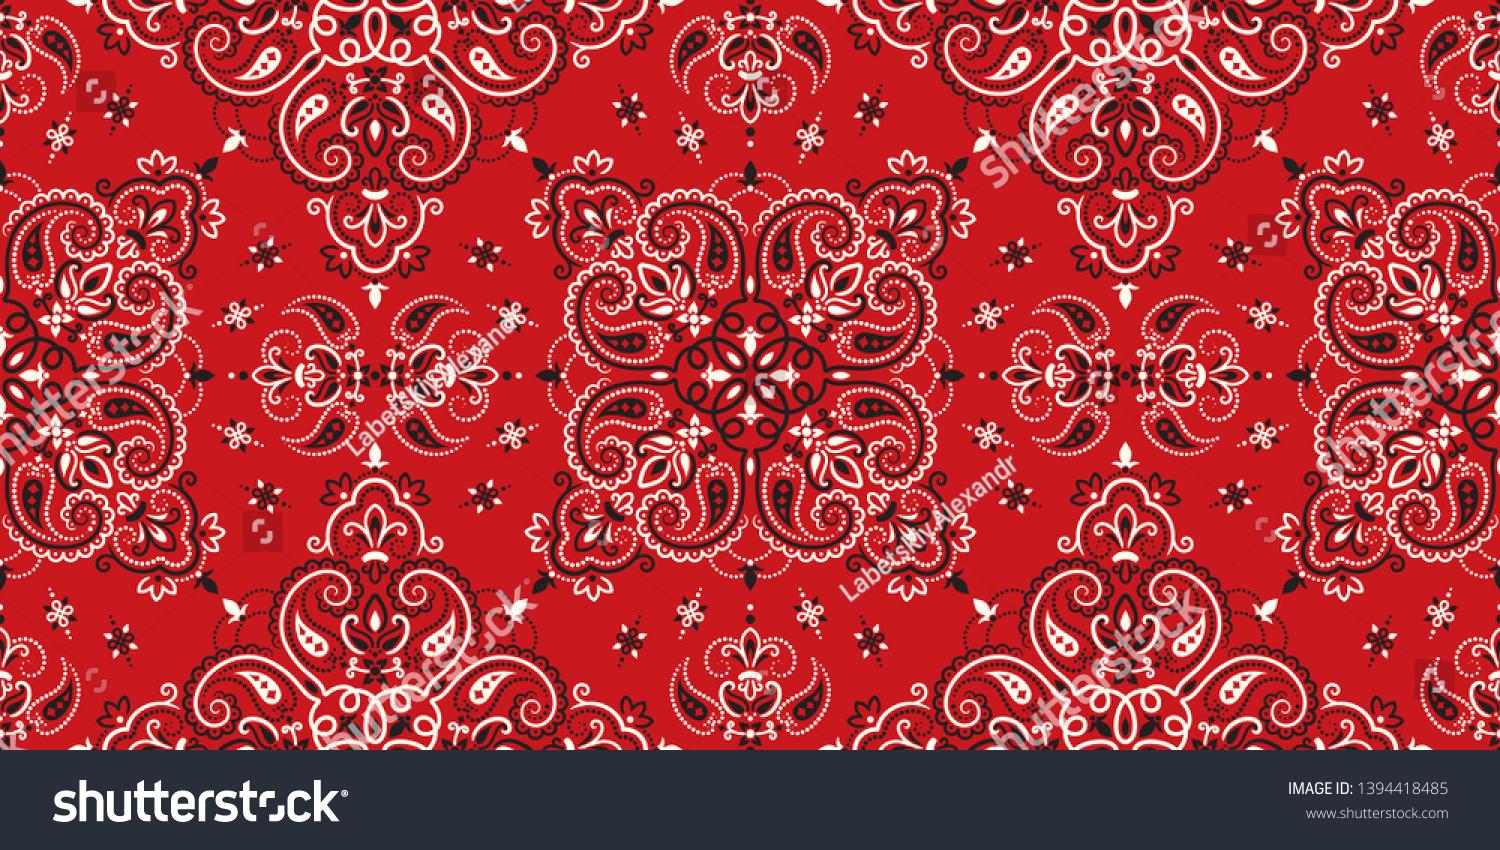 SVG of Seamless pattern based on ornament paisley Bandana Print. Boho vintage style vector background. Silk neck scarf or kerchief square pattern design style, best motive for print on fabric or papper. svg